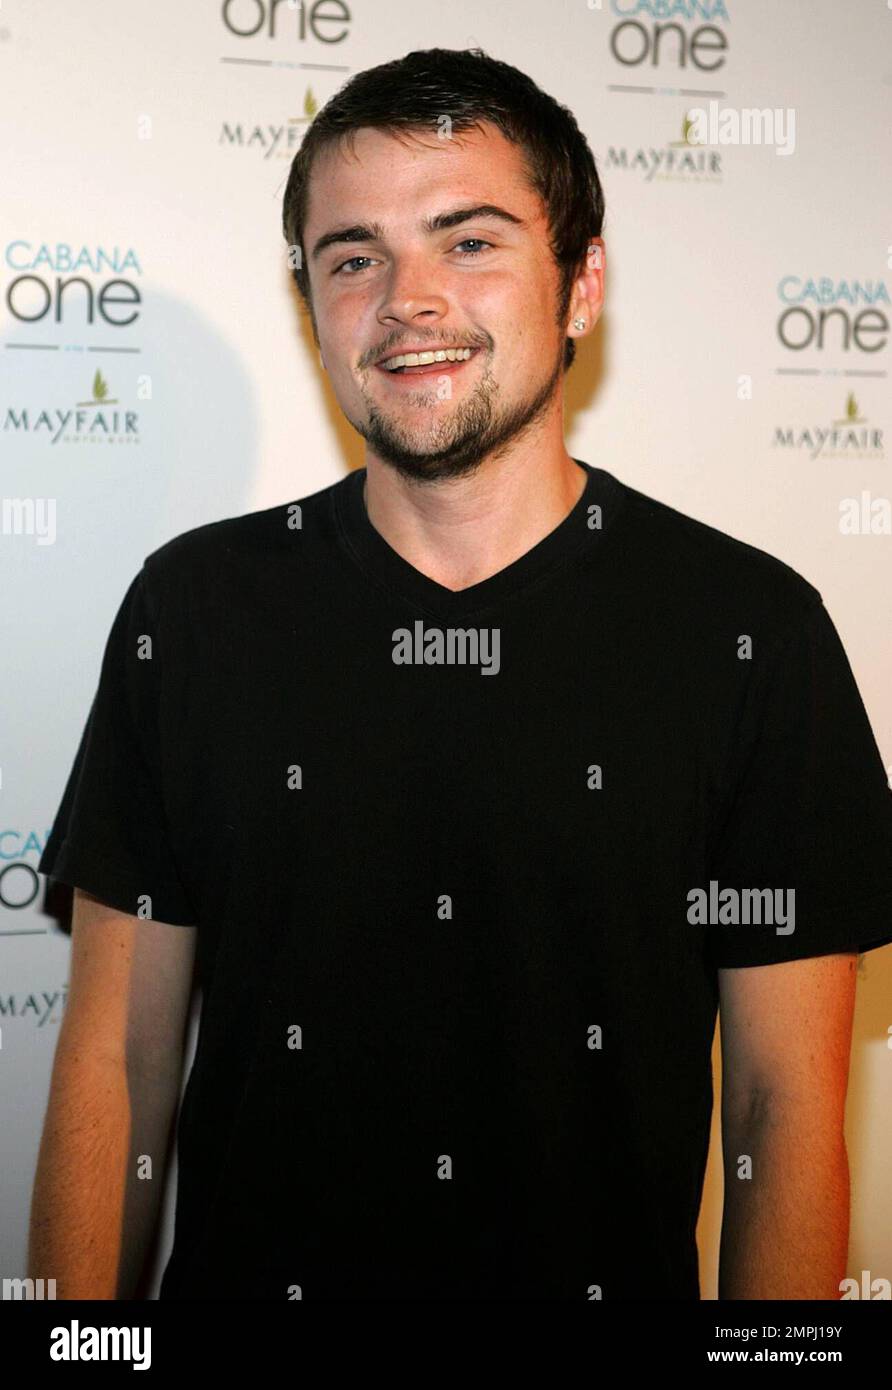 Actor Robert Iler appears on the red carpet for the grand opening of Cabana One Pool Club and Lounge at the Mayfair Hotel in Miami, FL. 10/3/08. Stock Photo